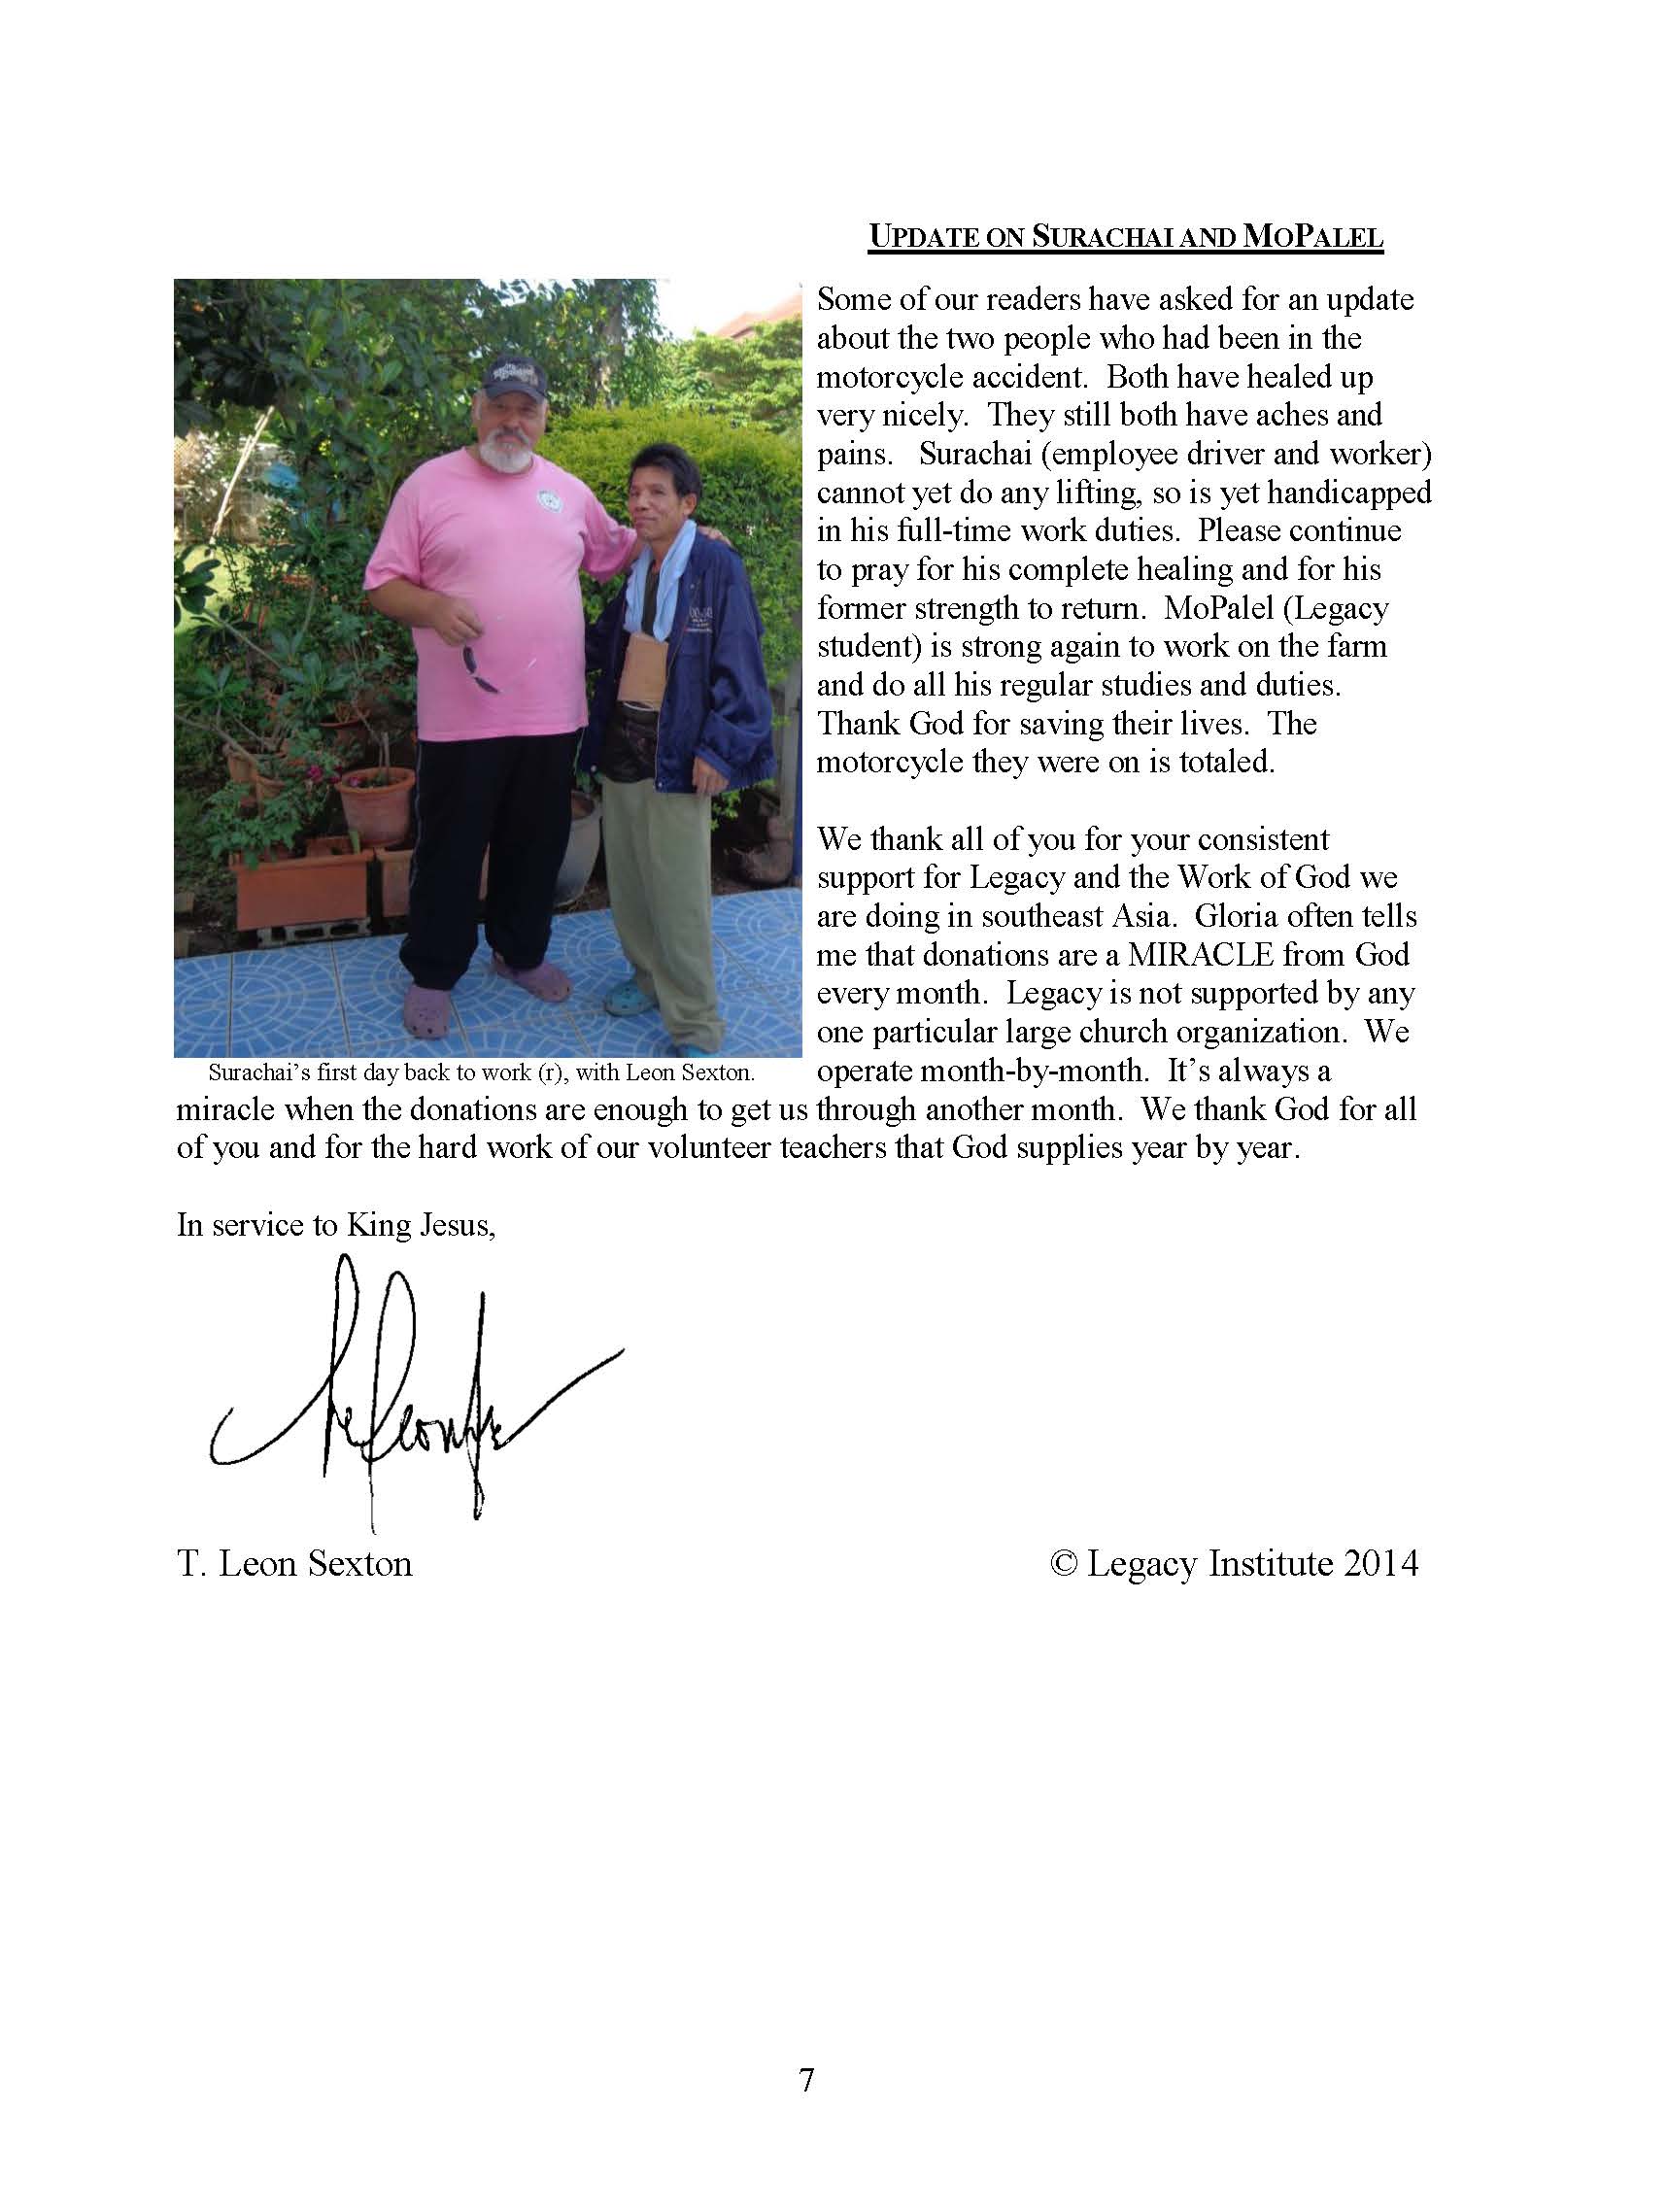 Legacy Letter June 2014_Page_7